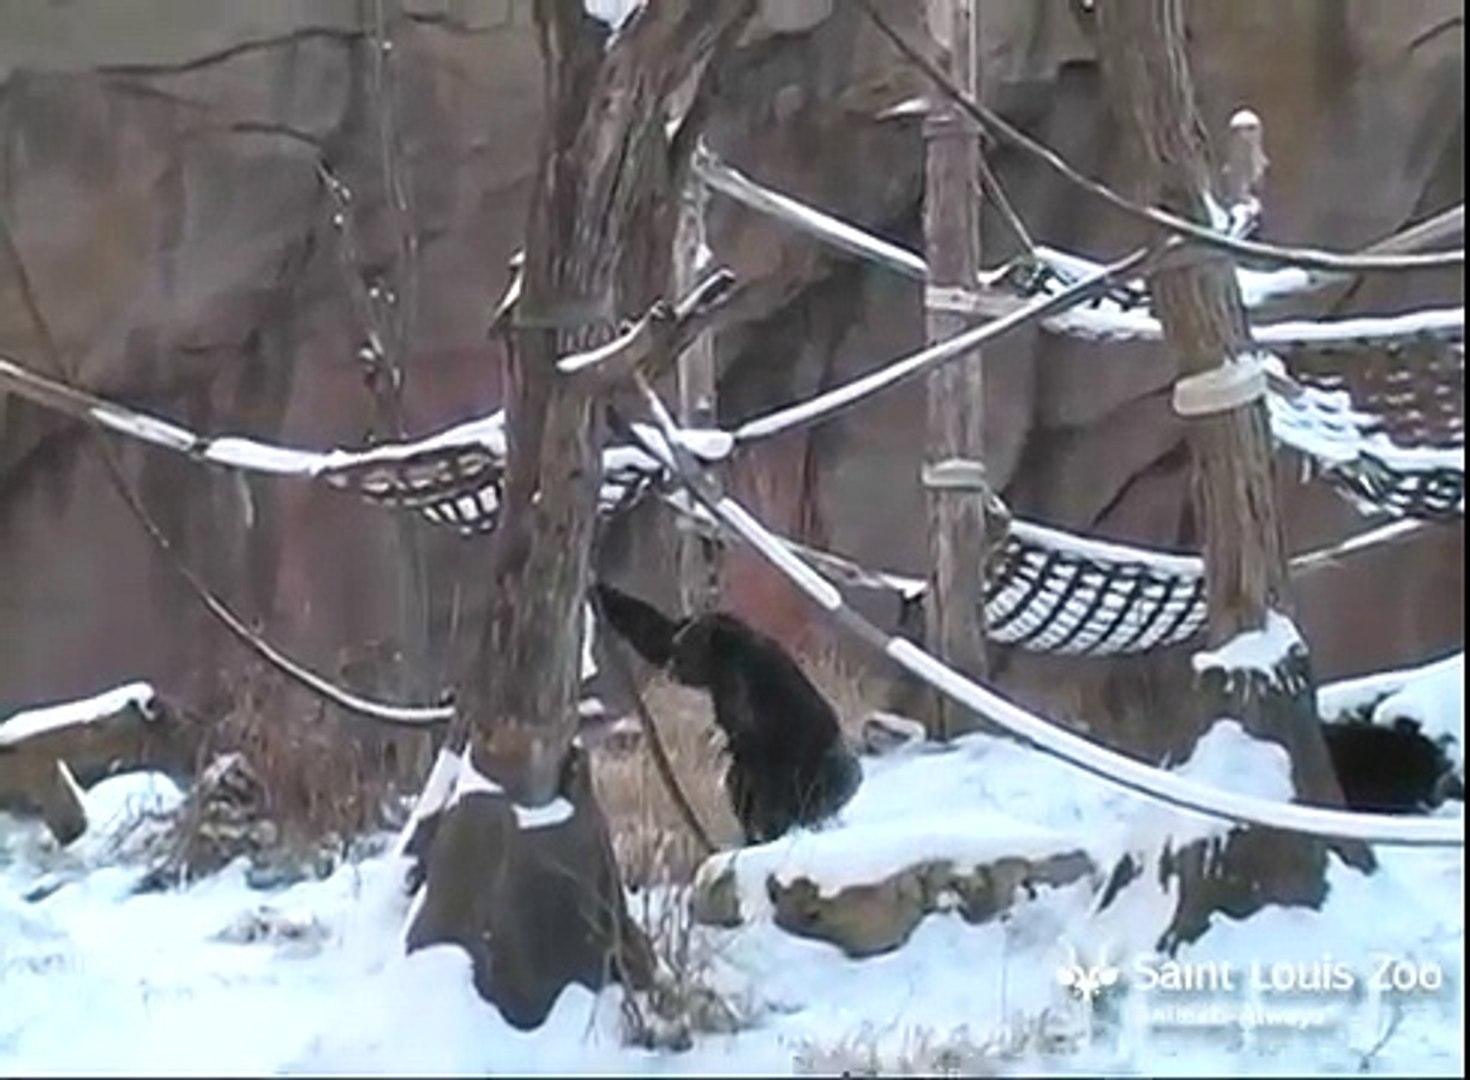 Snow day for the chimpanzees at Saint Louis Zoo